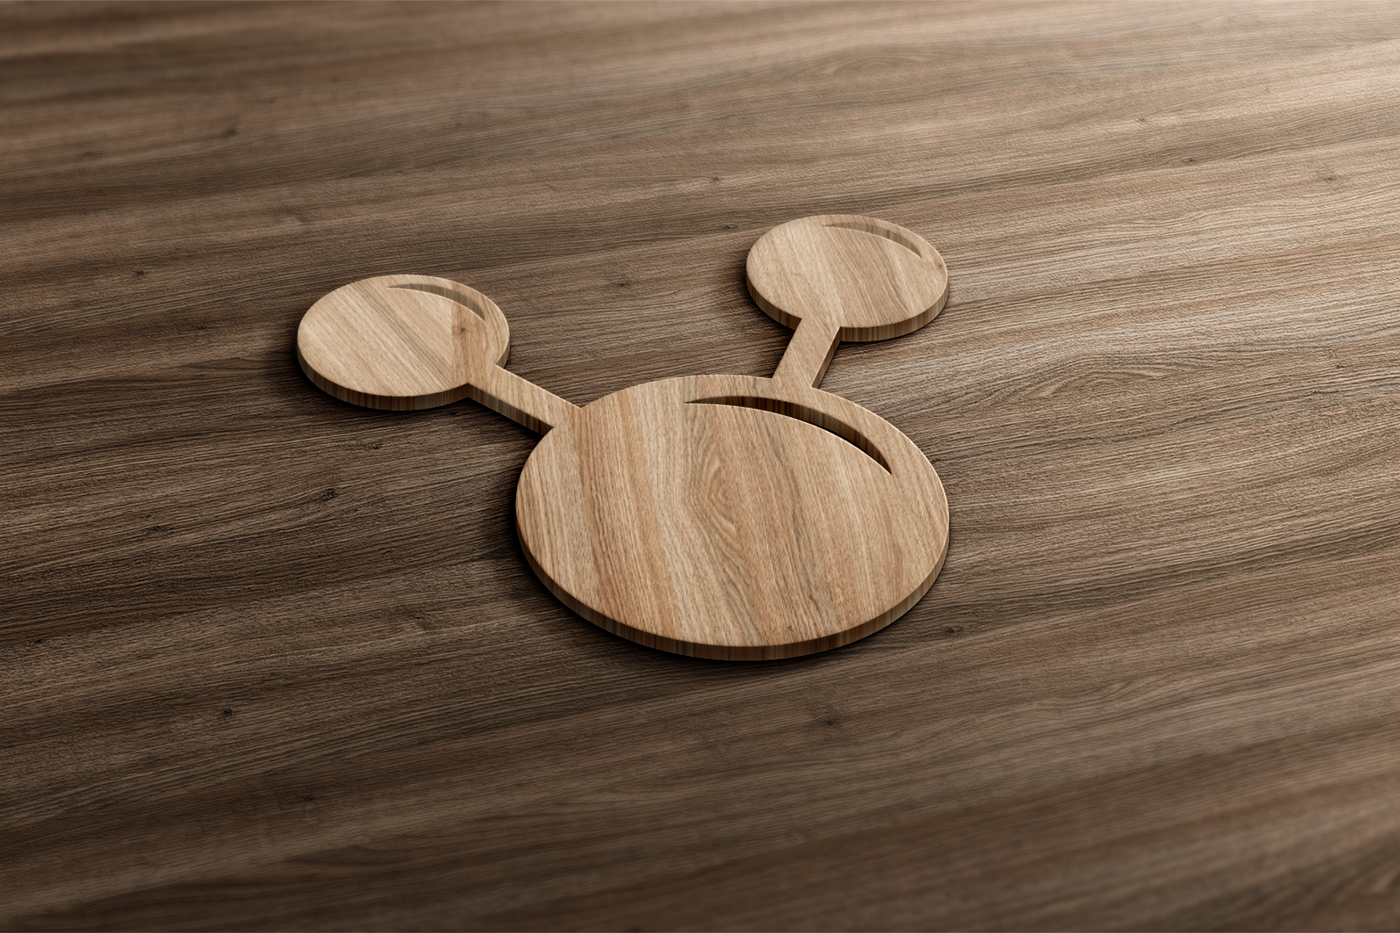 Atom design made out of wood